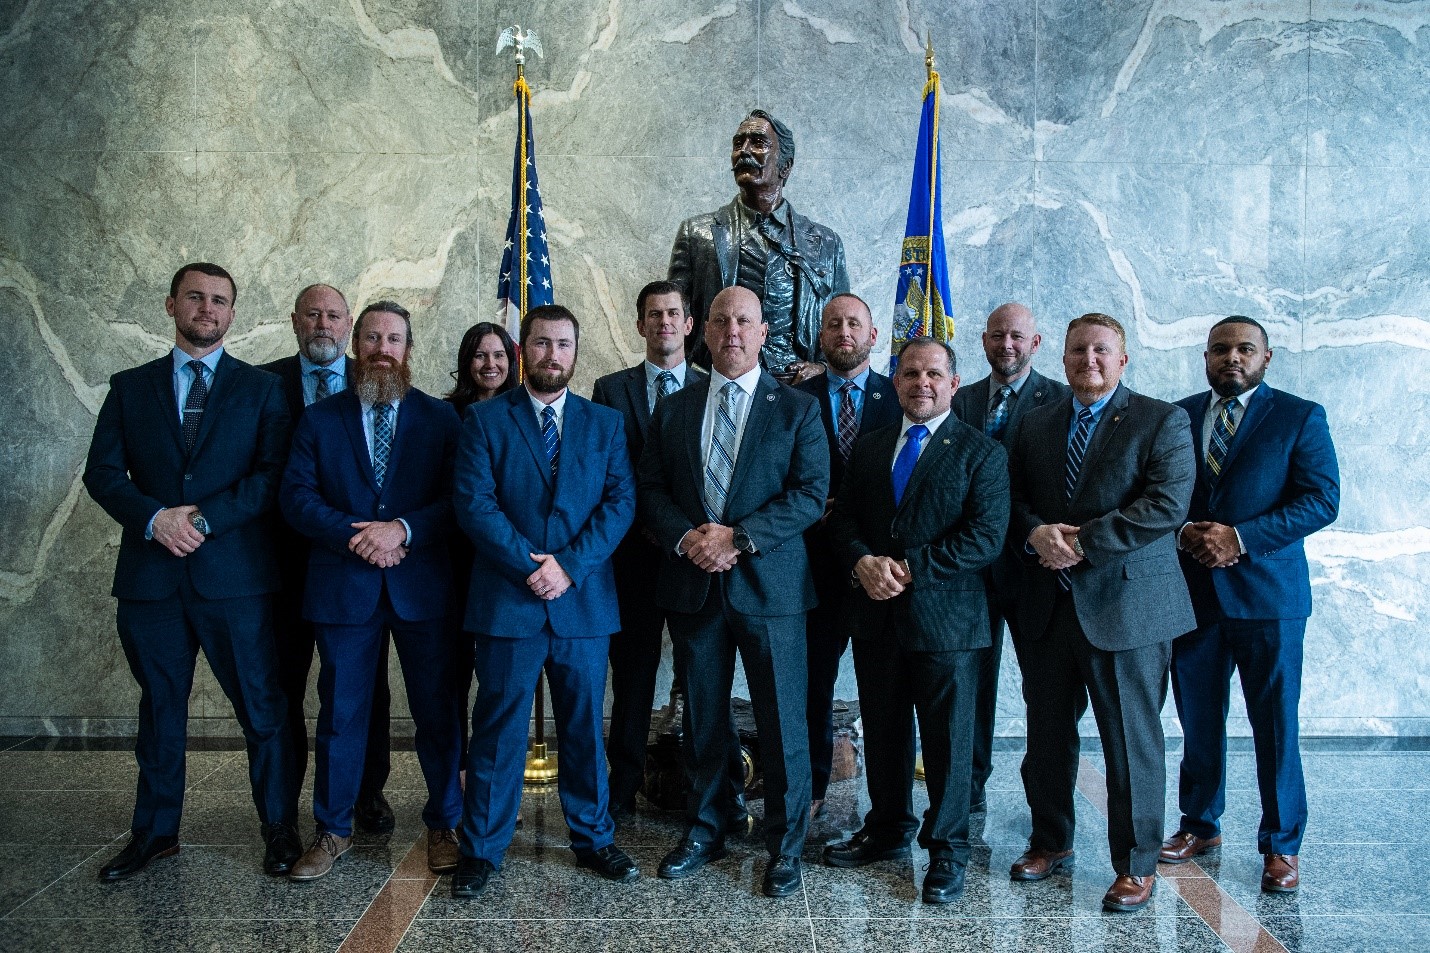 U.S. Marshals Service Task Force Officer, Scott Chambers and CARFTF members